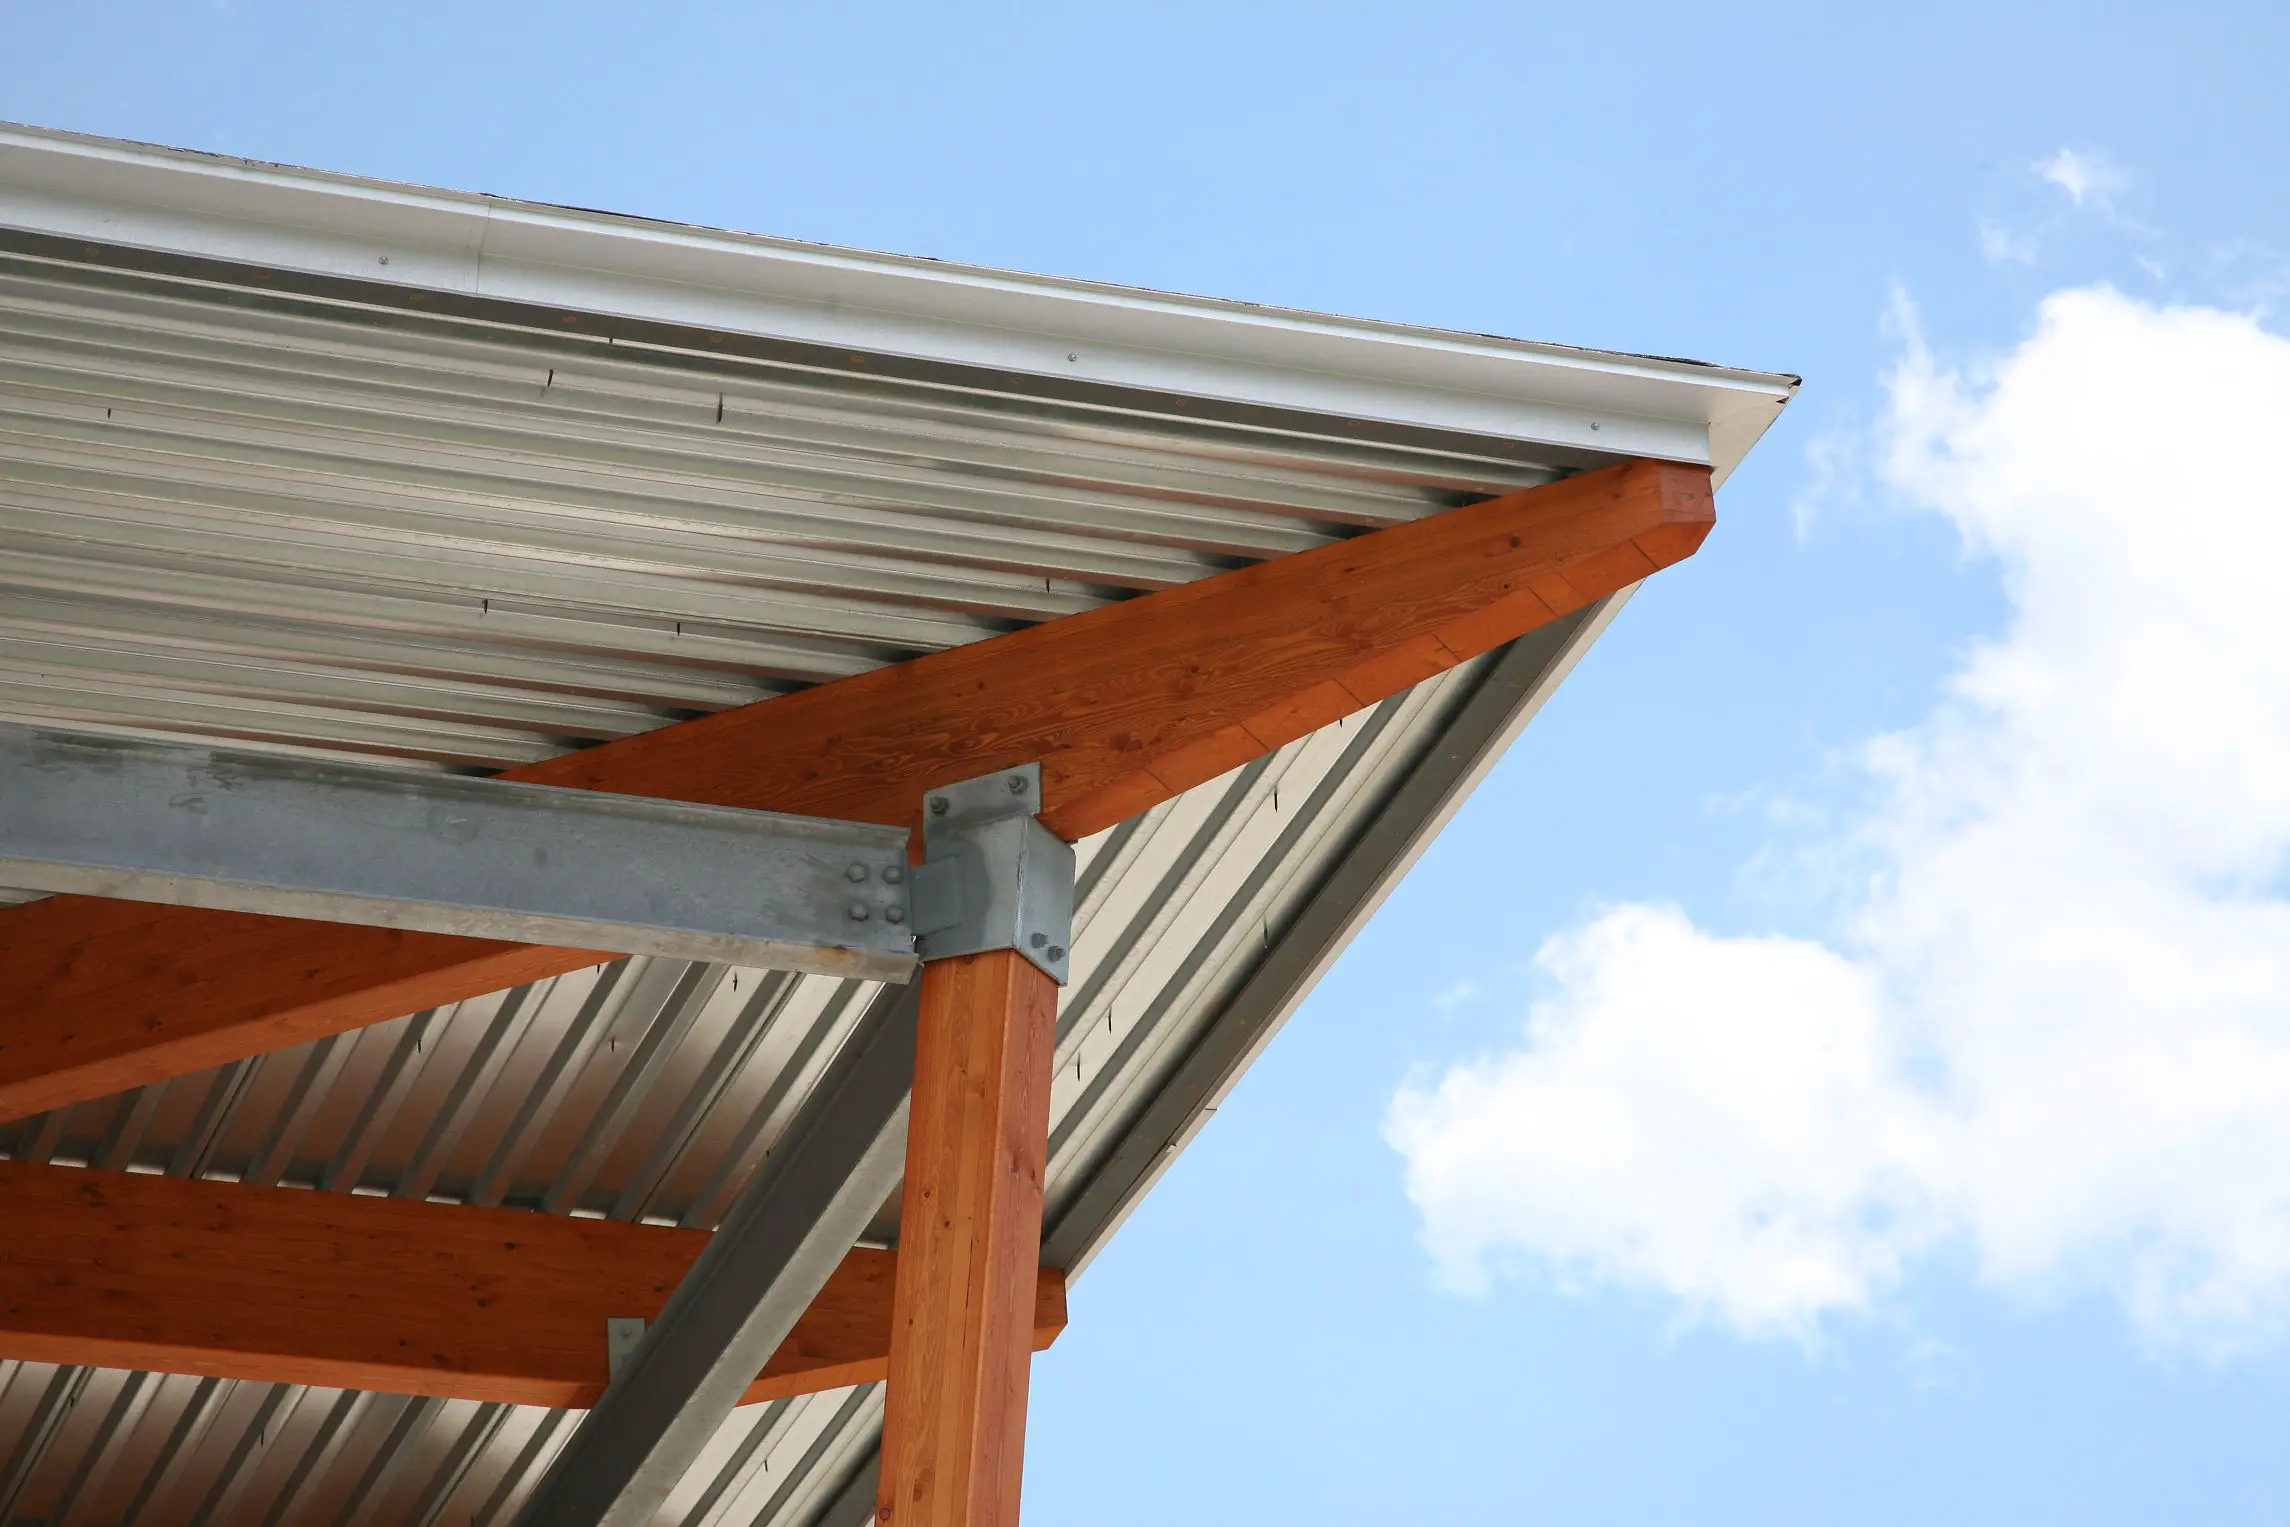 How to Install Corrugated Roof Panels Under a Deck ...